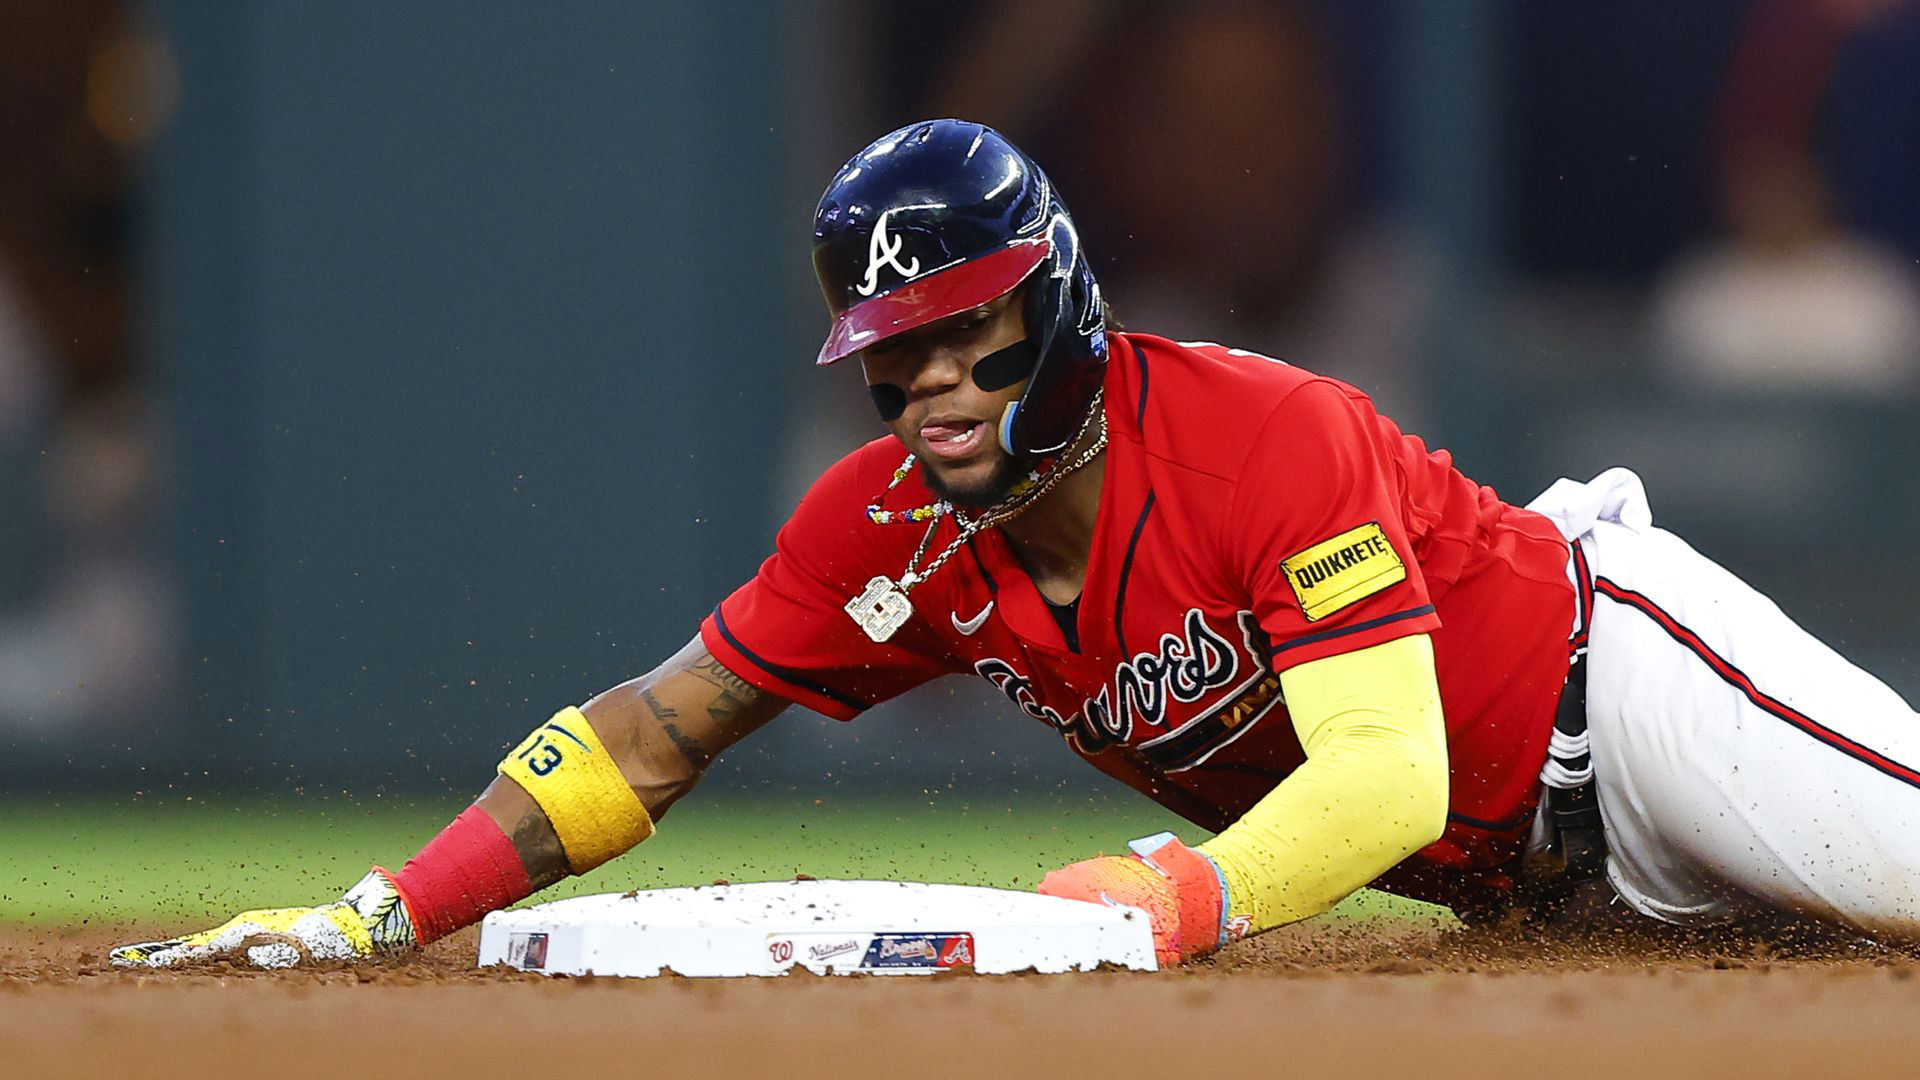 Ronald Acuña Jr sets modern day Braves record for stolen bases in a season